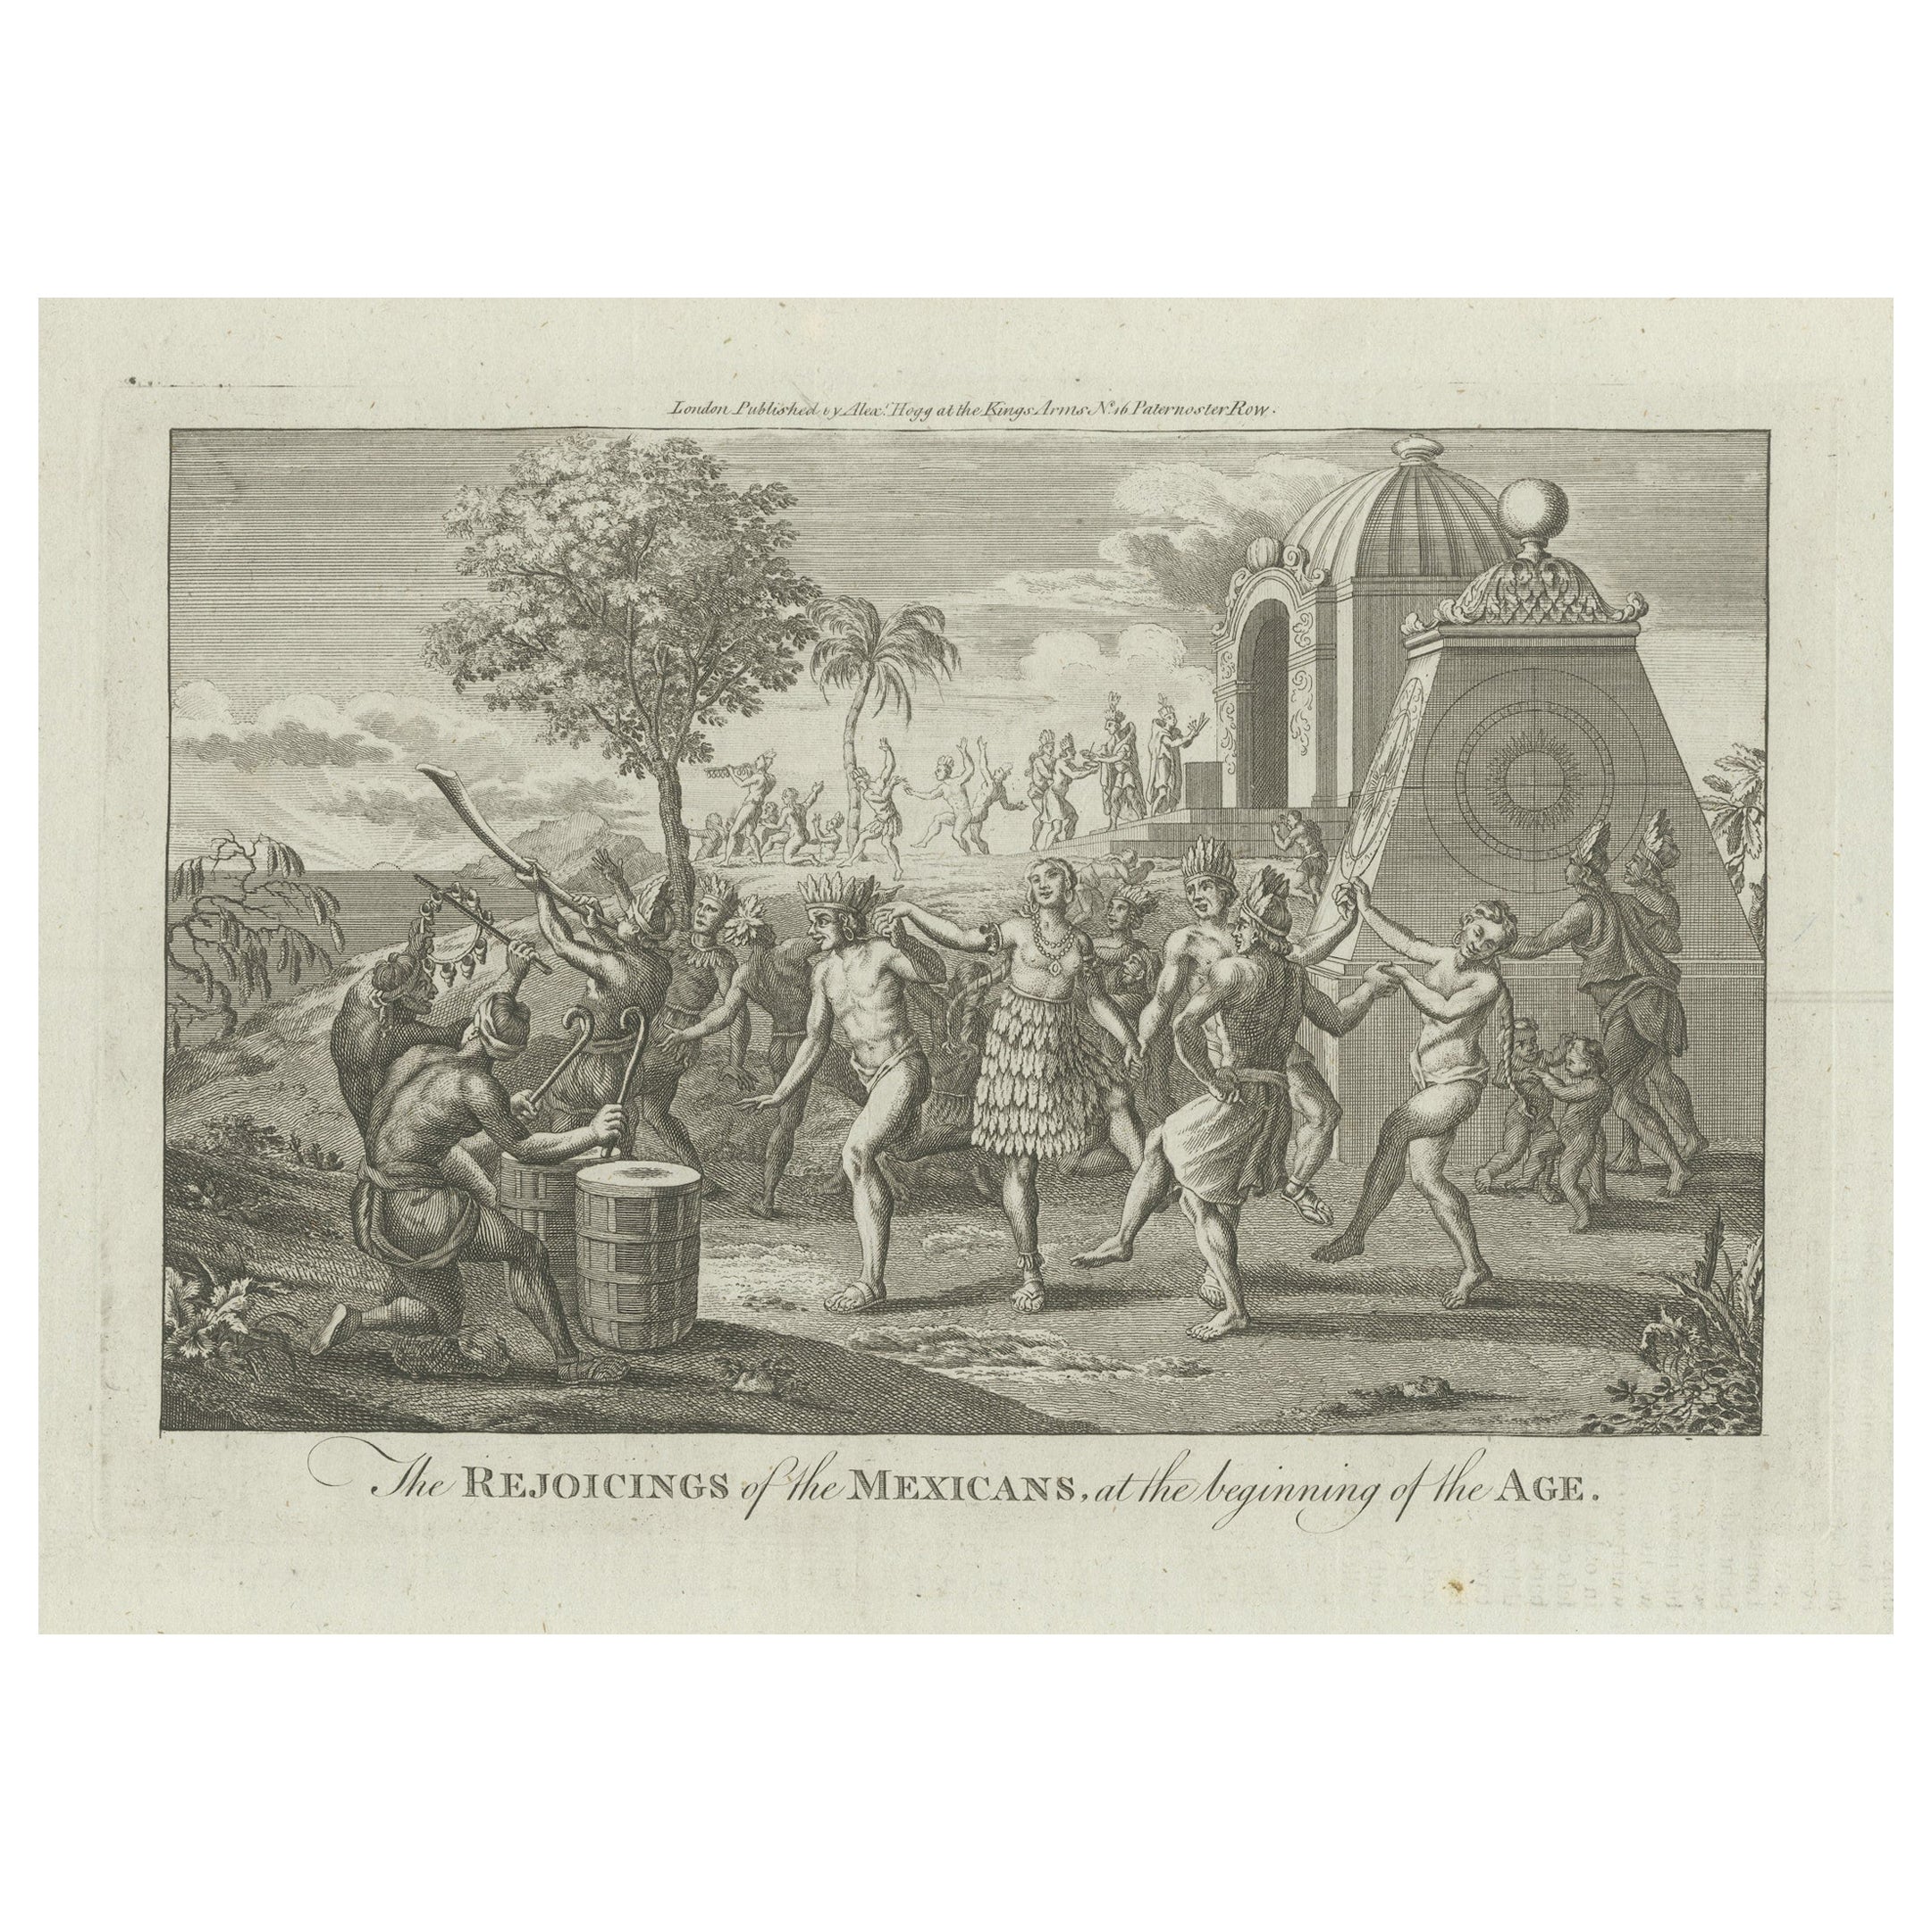 Celebration and Ritual: Engraving of Mexican Festivities in the Age of Discovery